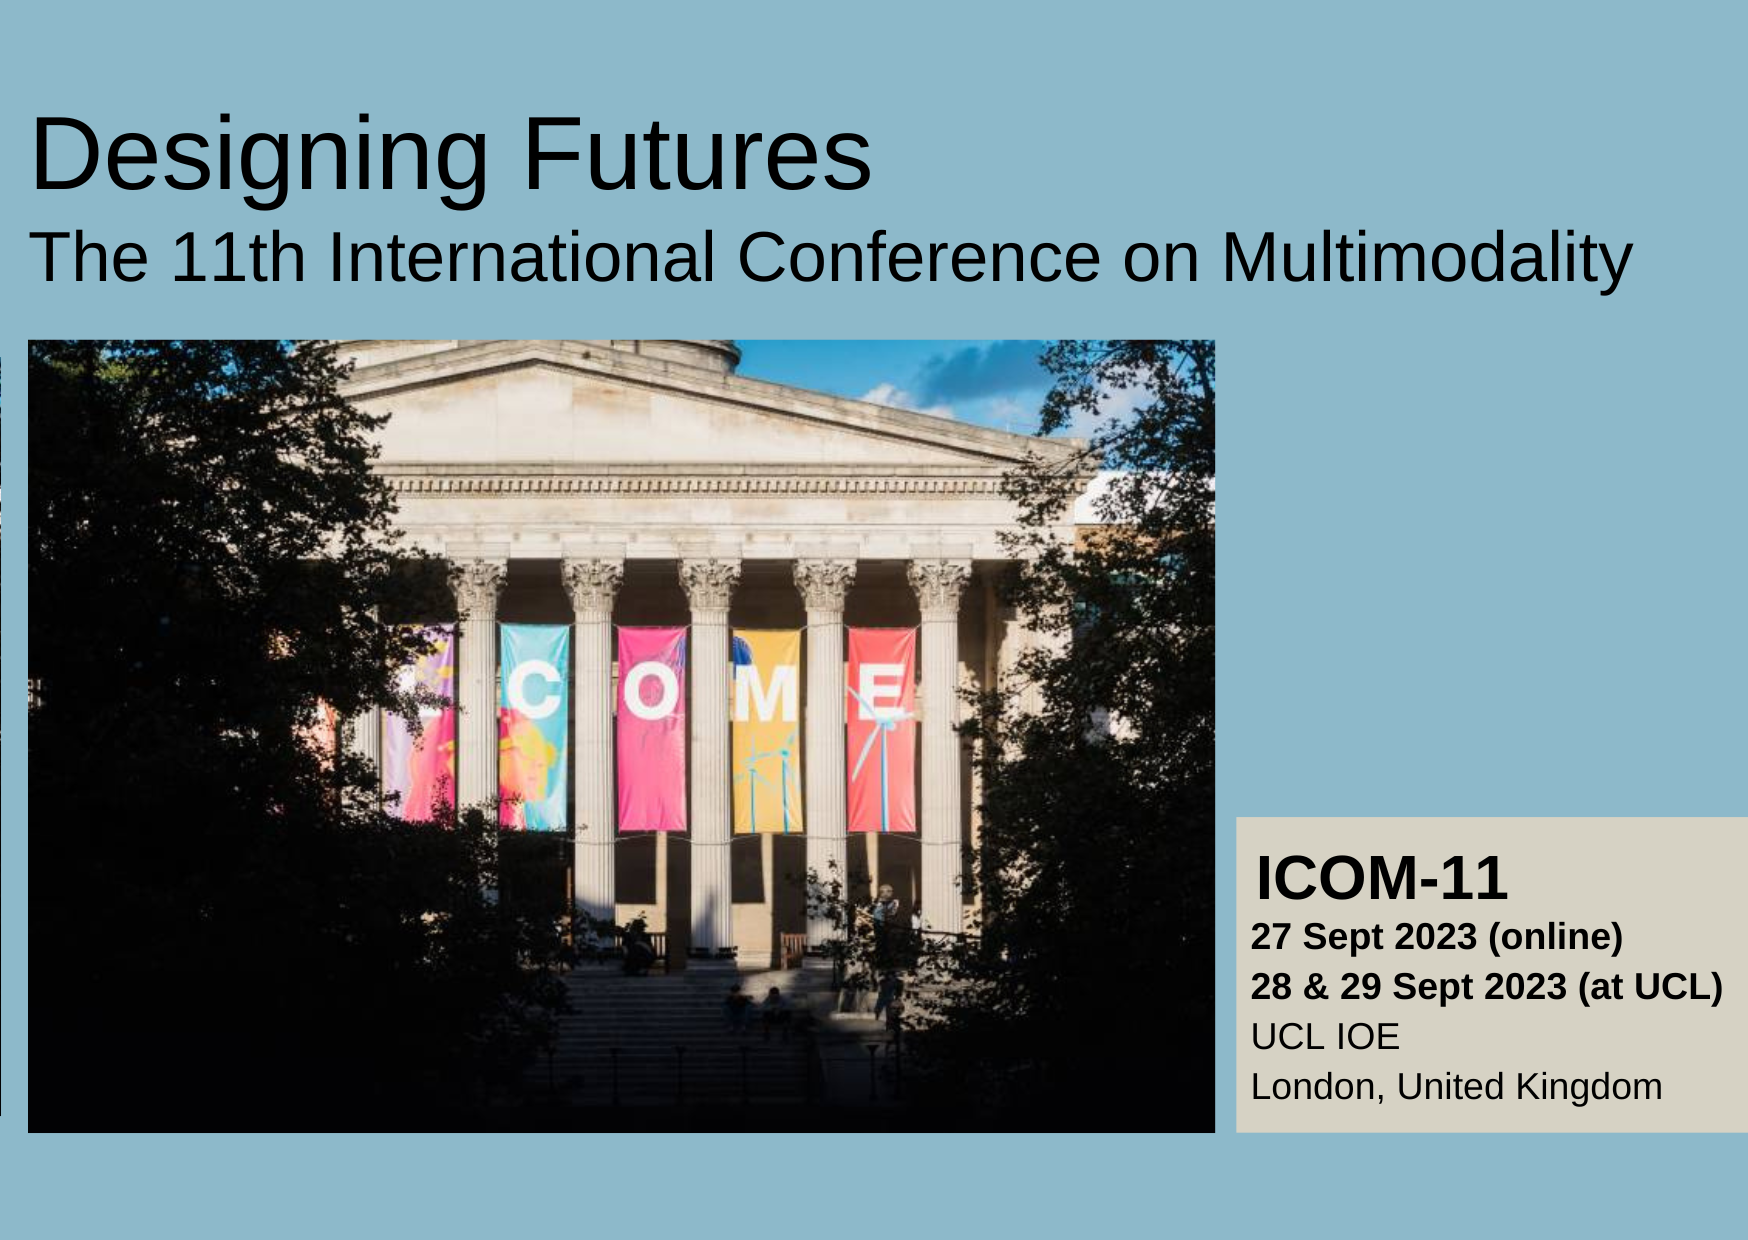 The 11th International Conference on Multimodality (ICOM-11)